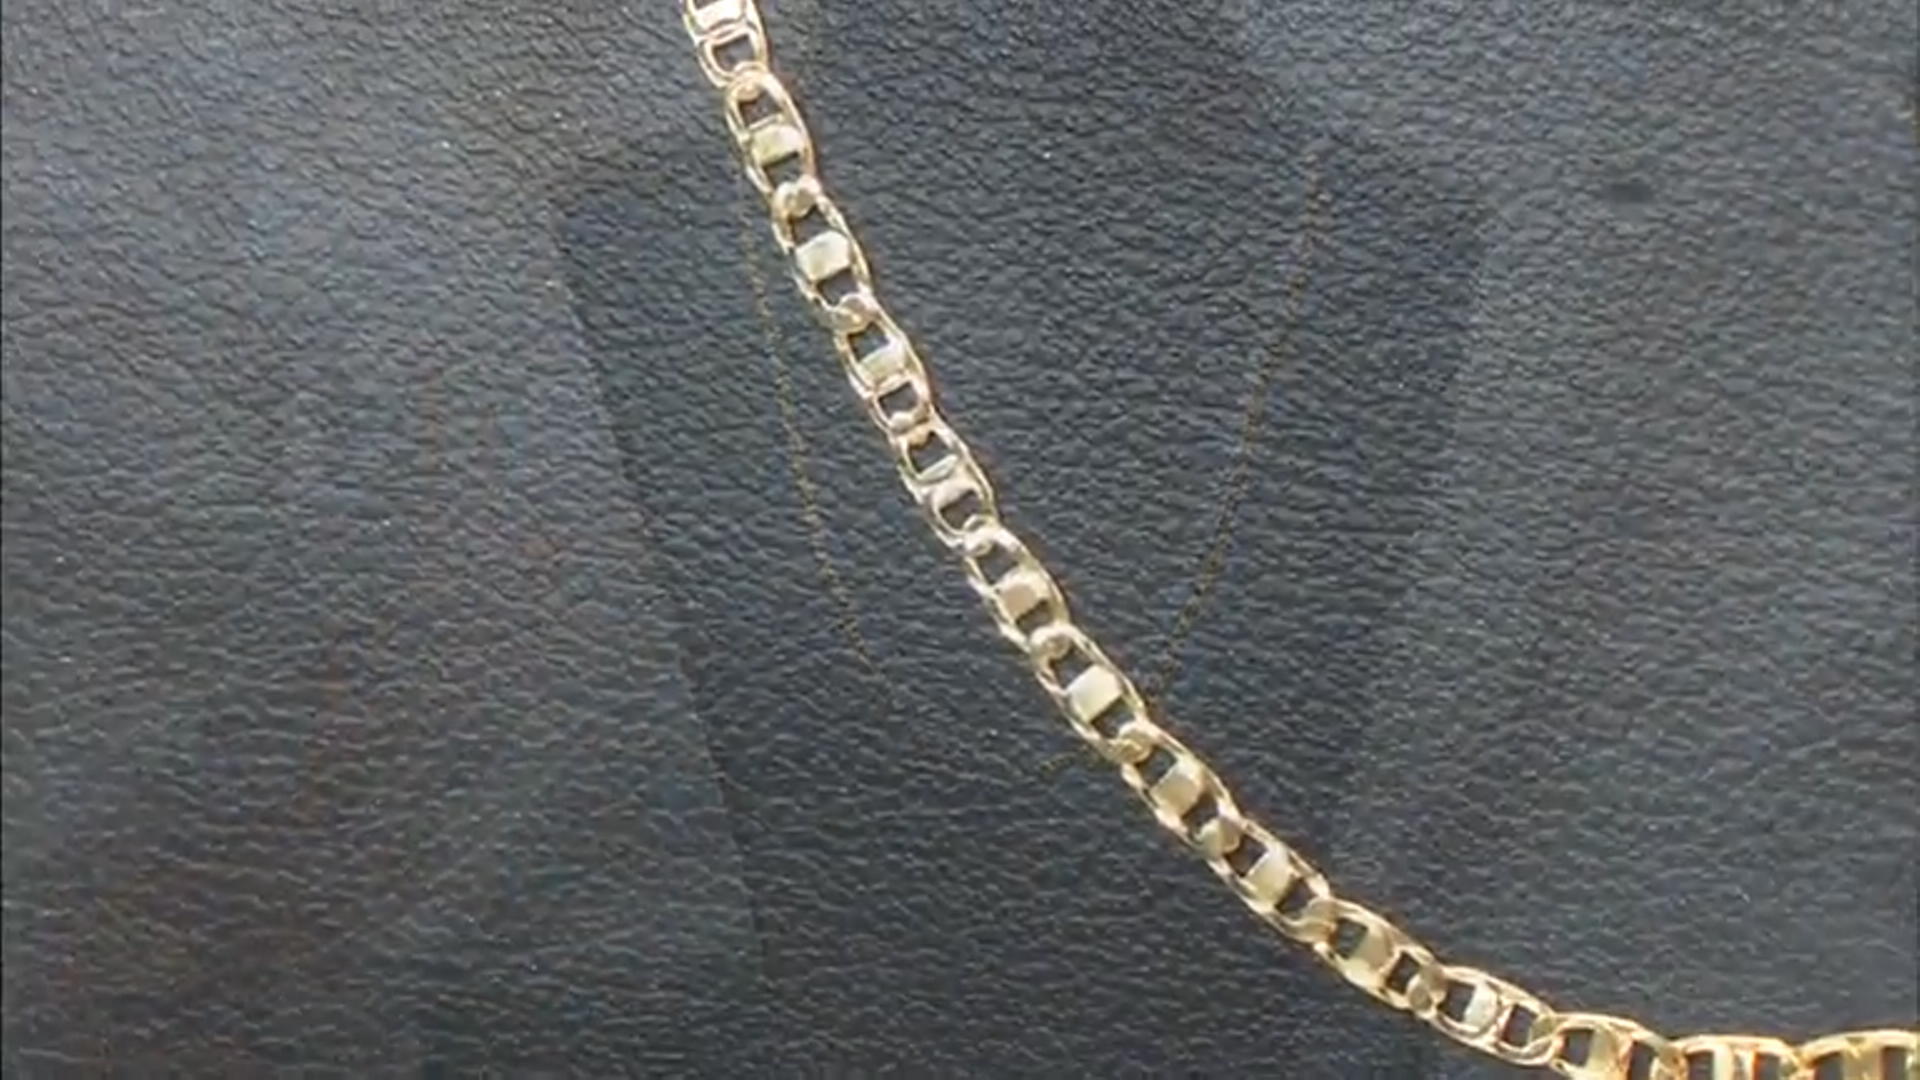 18k Yellow Gold Over Sterling Silver 2.3mm Flat Textured Valentino 20 Inch Chain Video Thumbnail